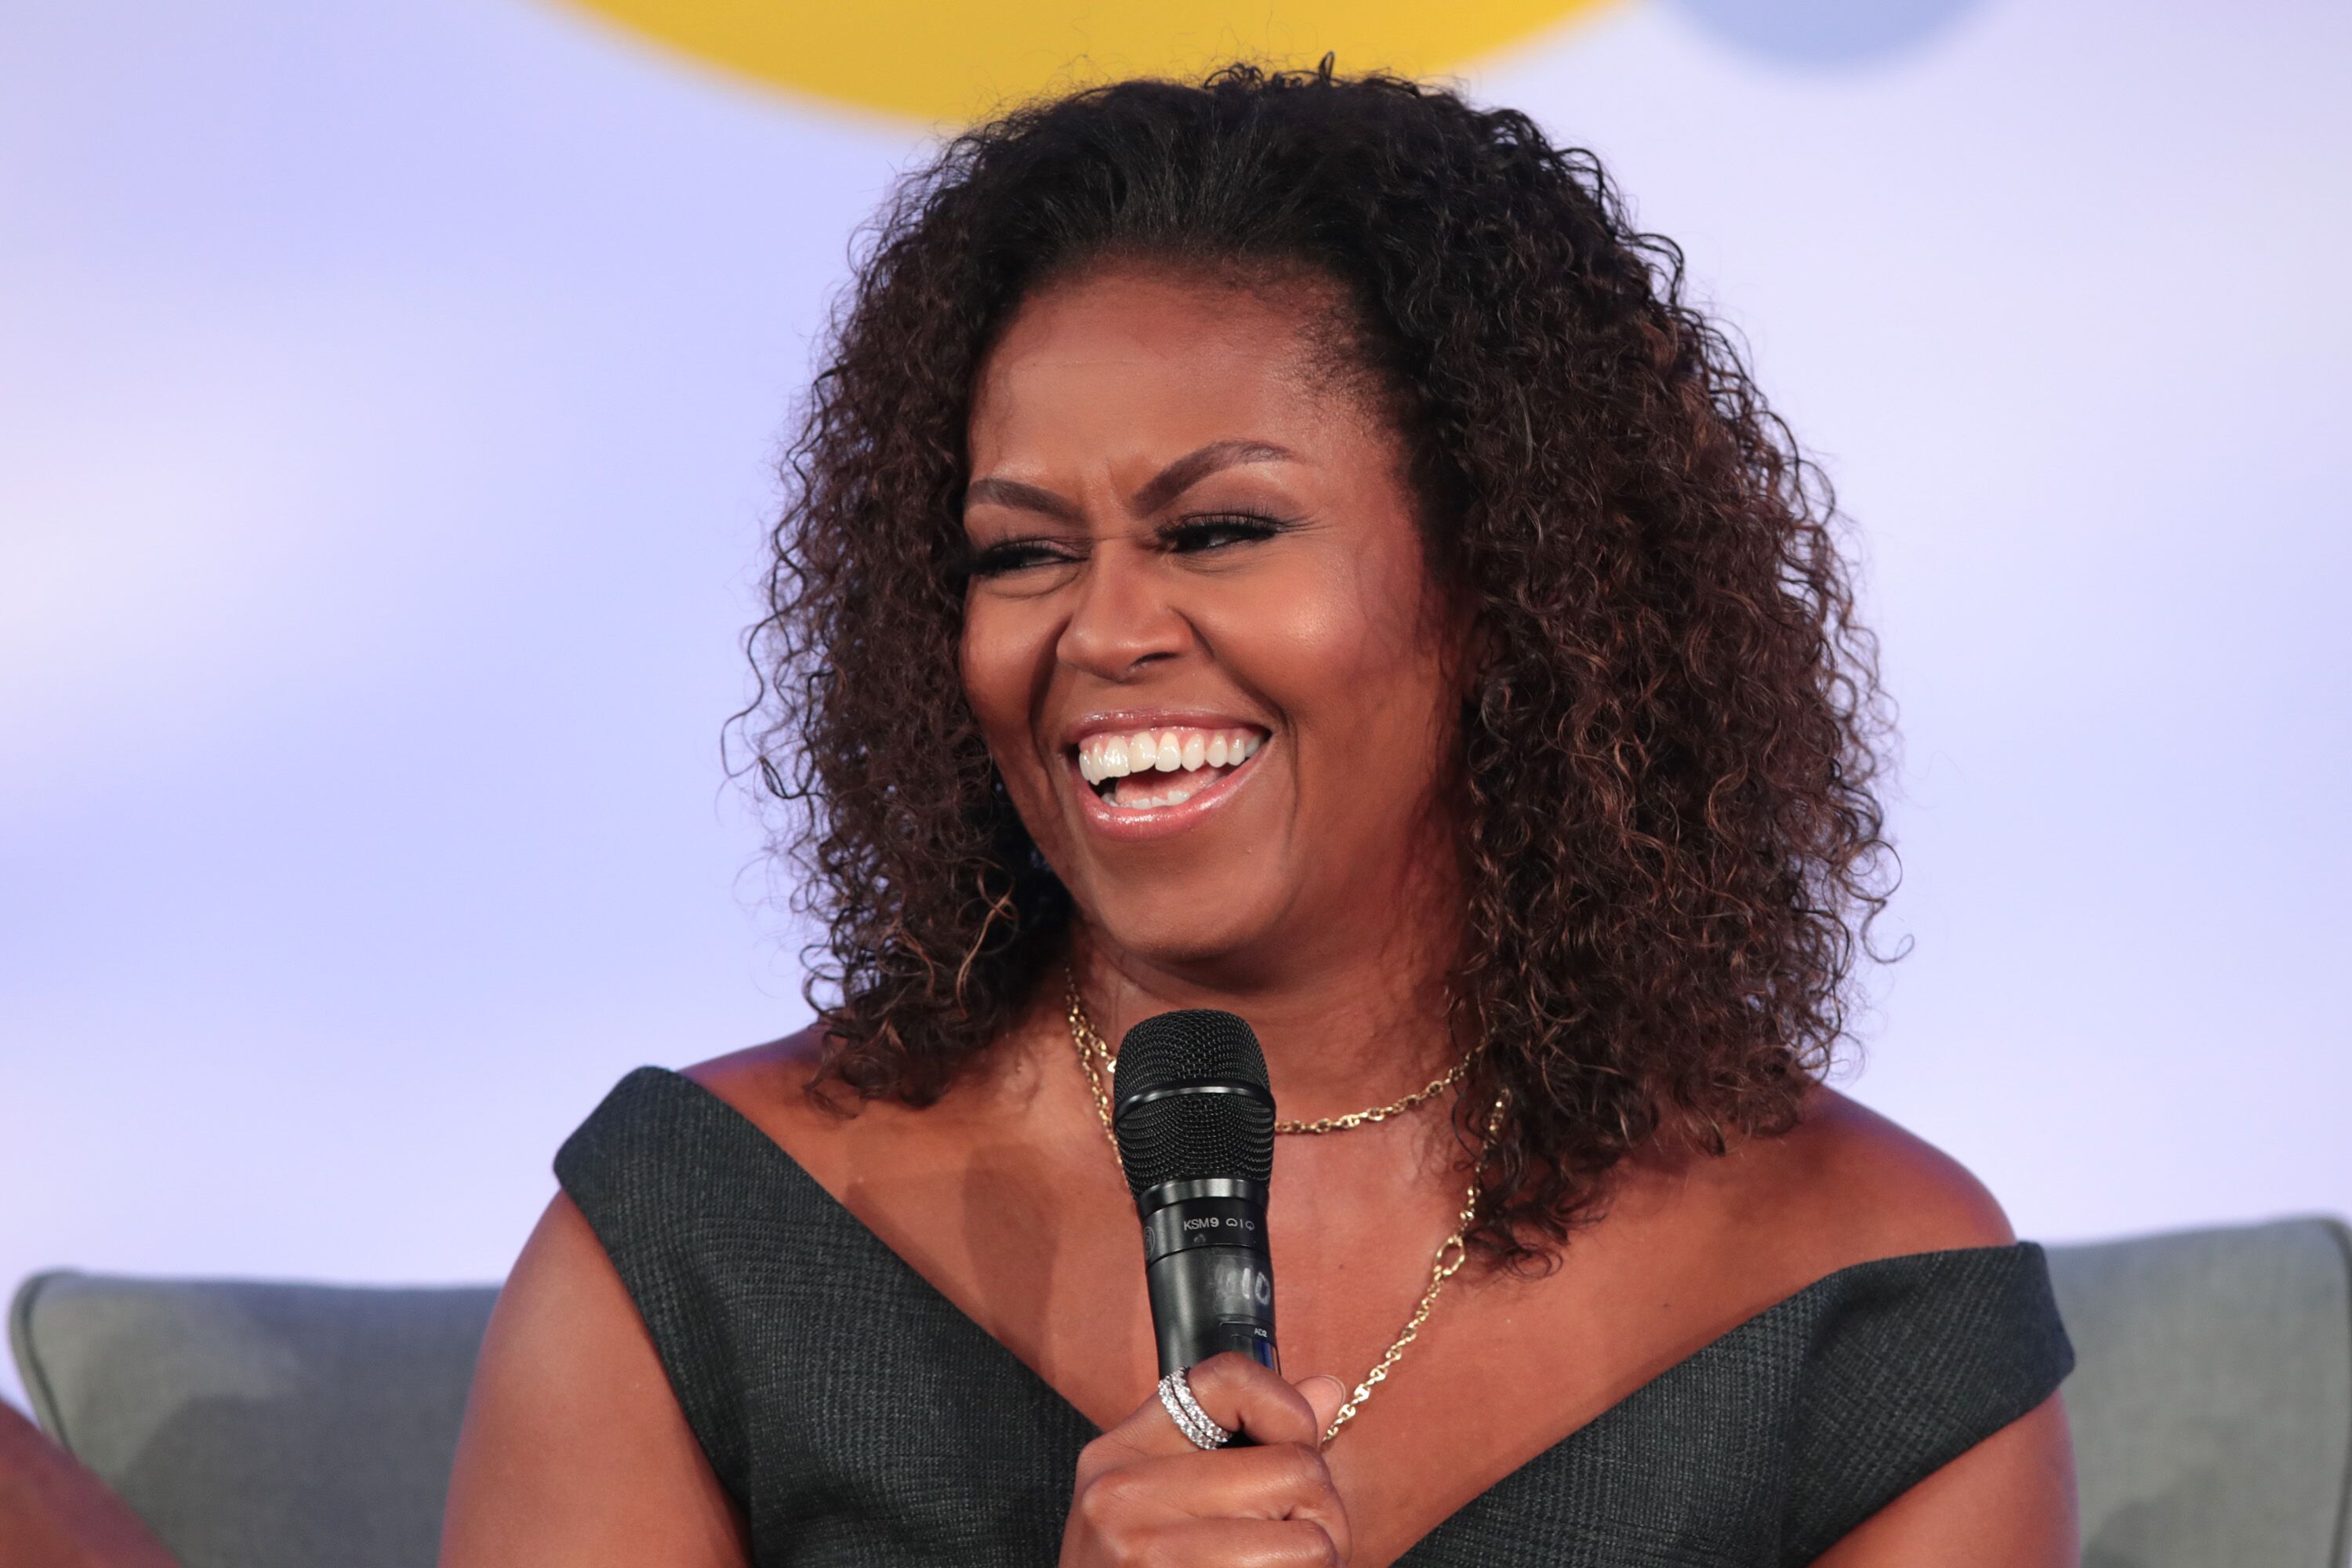 Michelle Obama speaks to guests at the Obama Foundation Summit. | Source: Getty Images